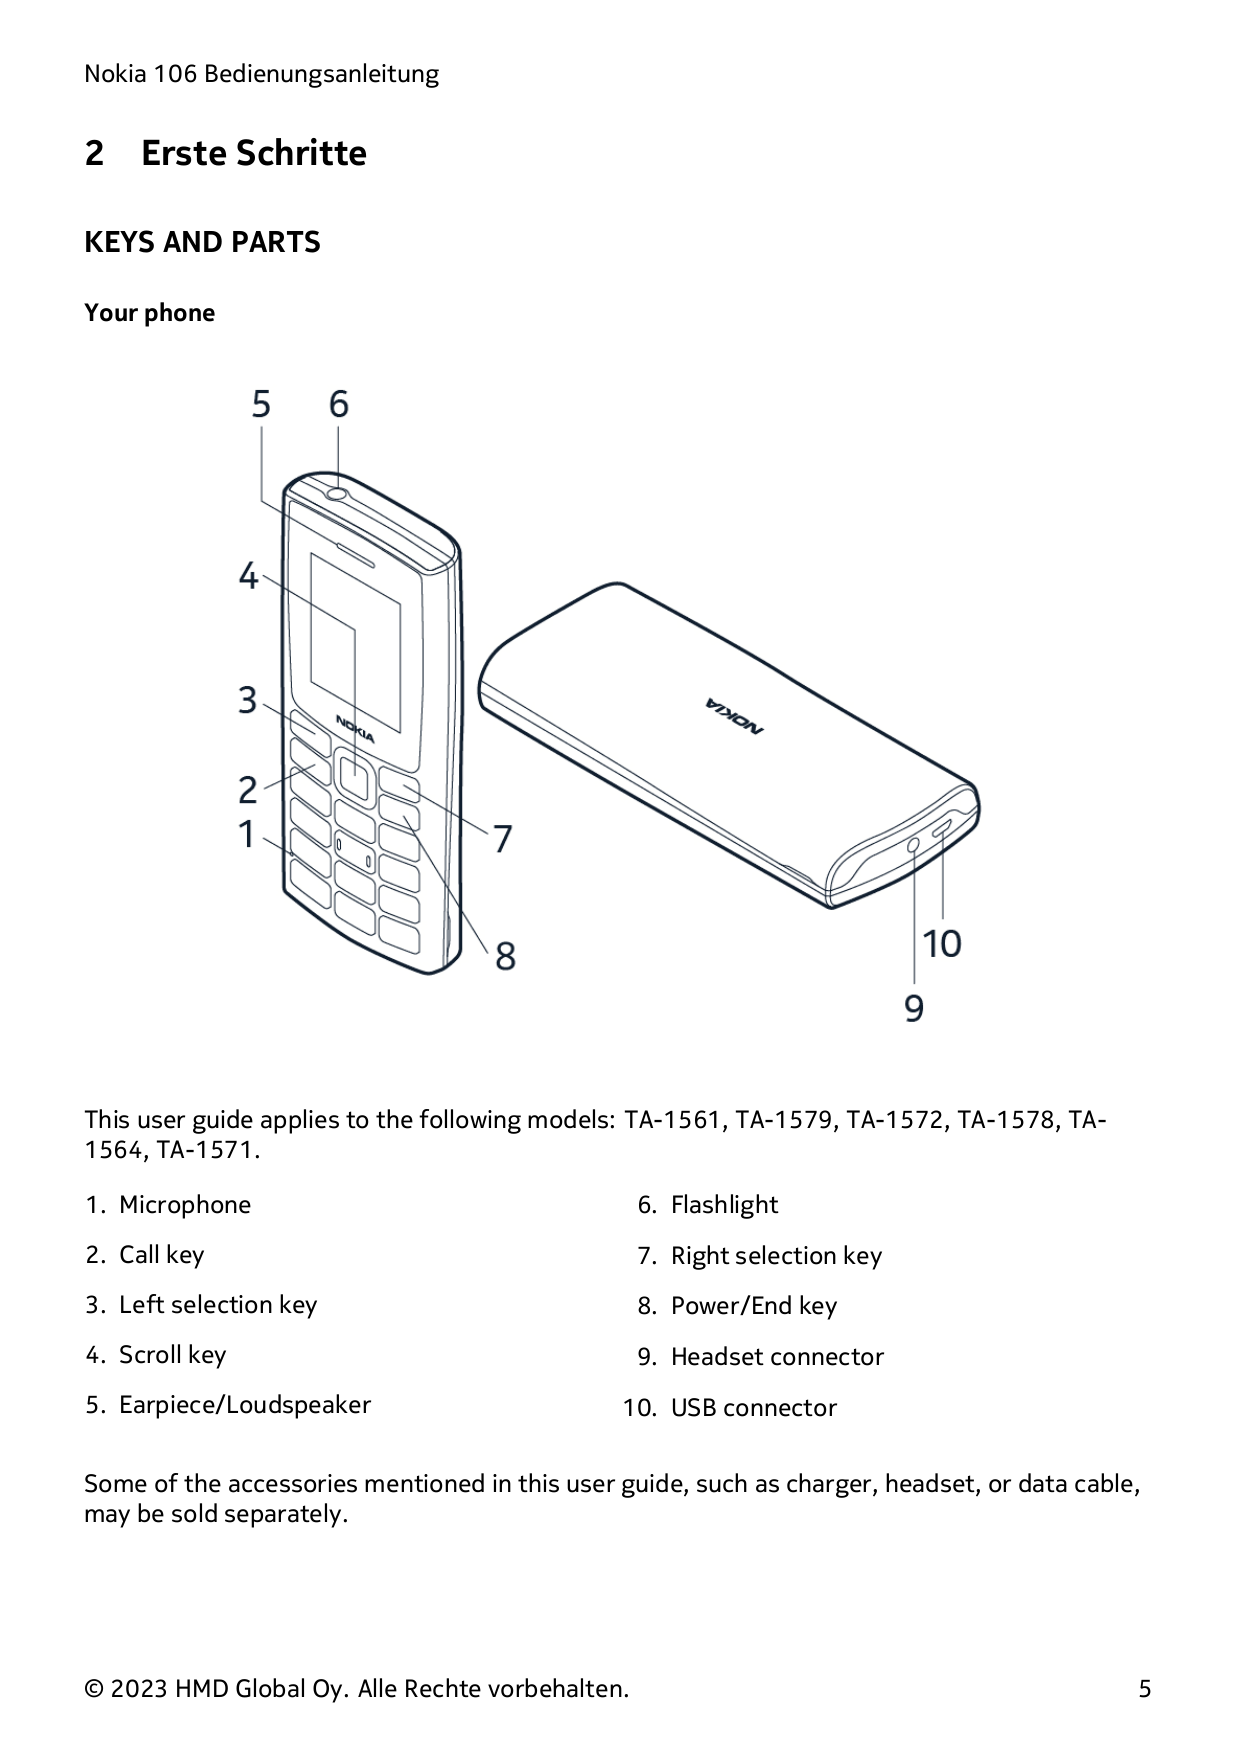 Nokia 106 Bedienungsanleitung2Erste SchritteKEYS AND PARTSYour phoneThis user guide applies to the following models: TA-1561, TA